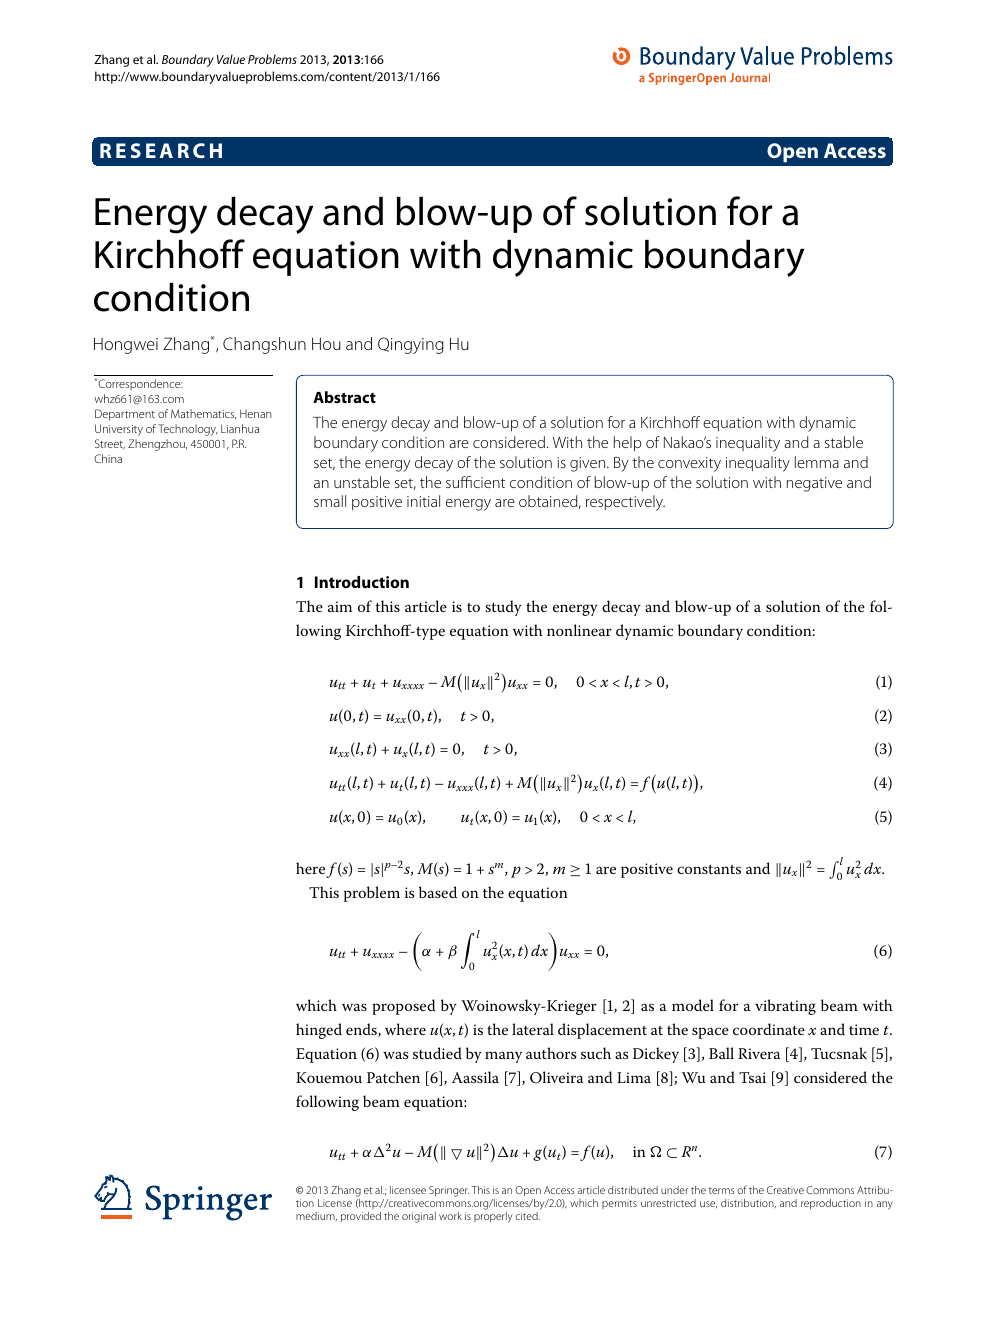 Energy Decay And Blow Up Of Solution For A Kirchhoff Equation With Dynamic Boundary Condition Topic Of Research Paper In Mathematics Download Scholarly Article Pdf And Read For Free On Cyberleninka Open